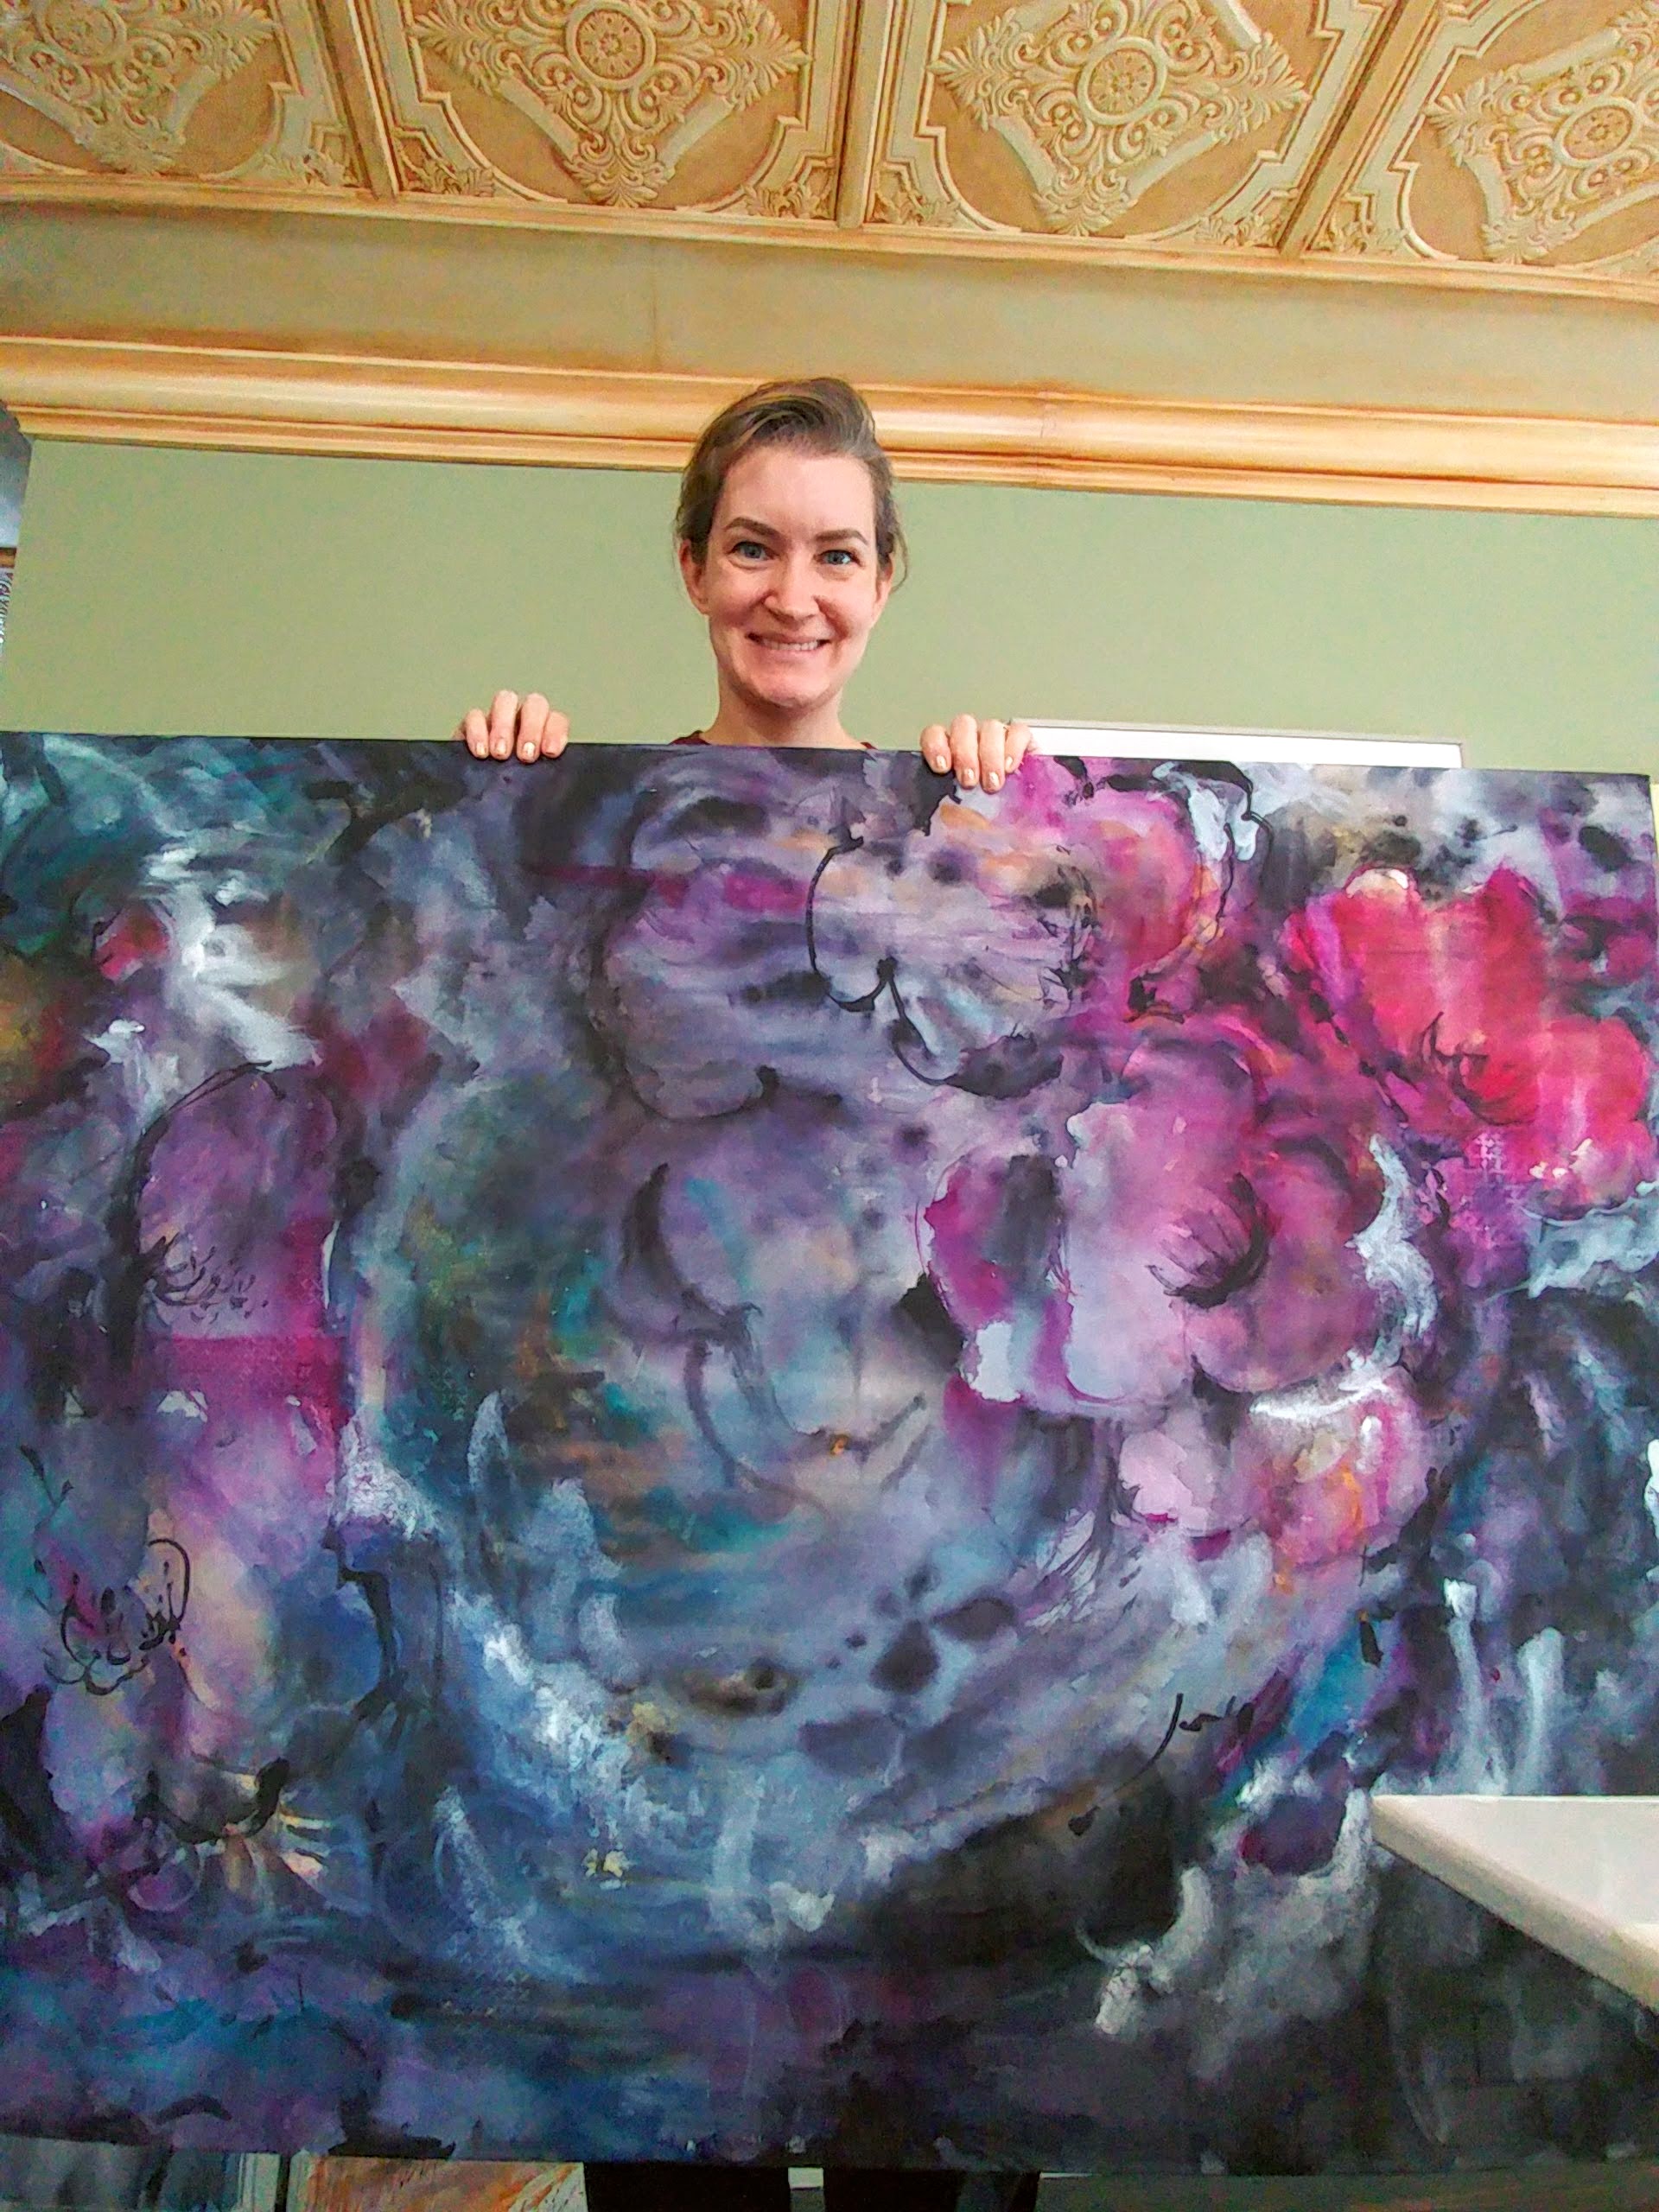 Painting on a Very Big or Oversized Canvas